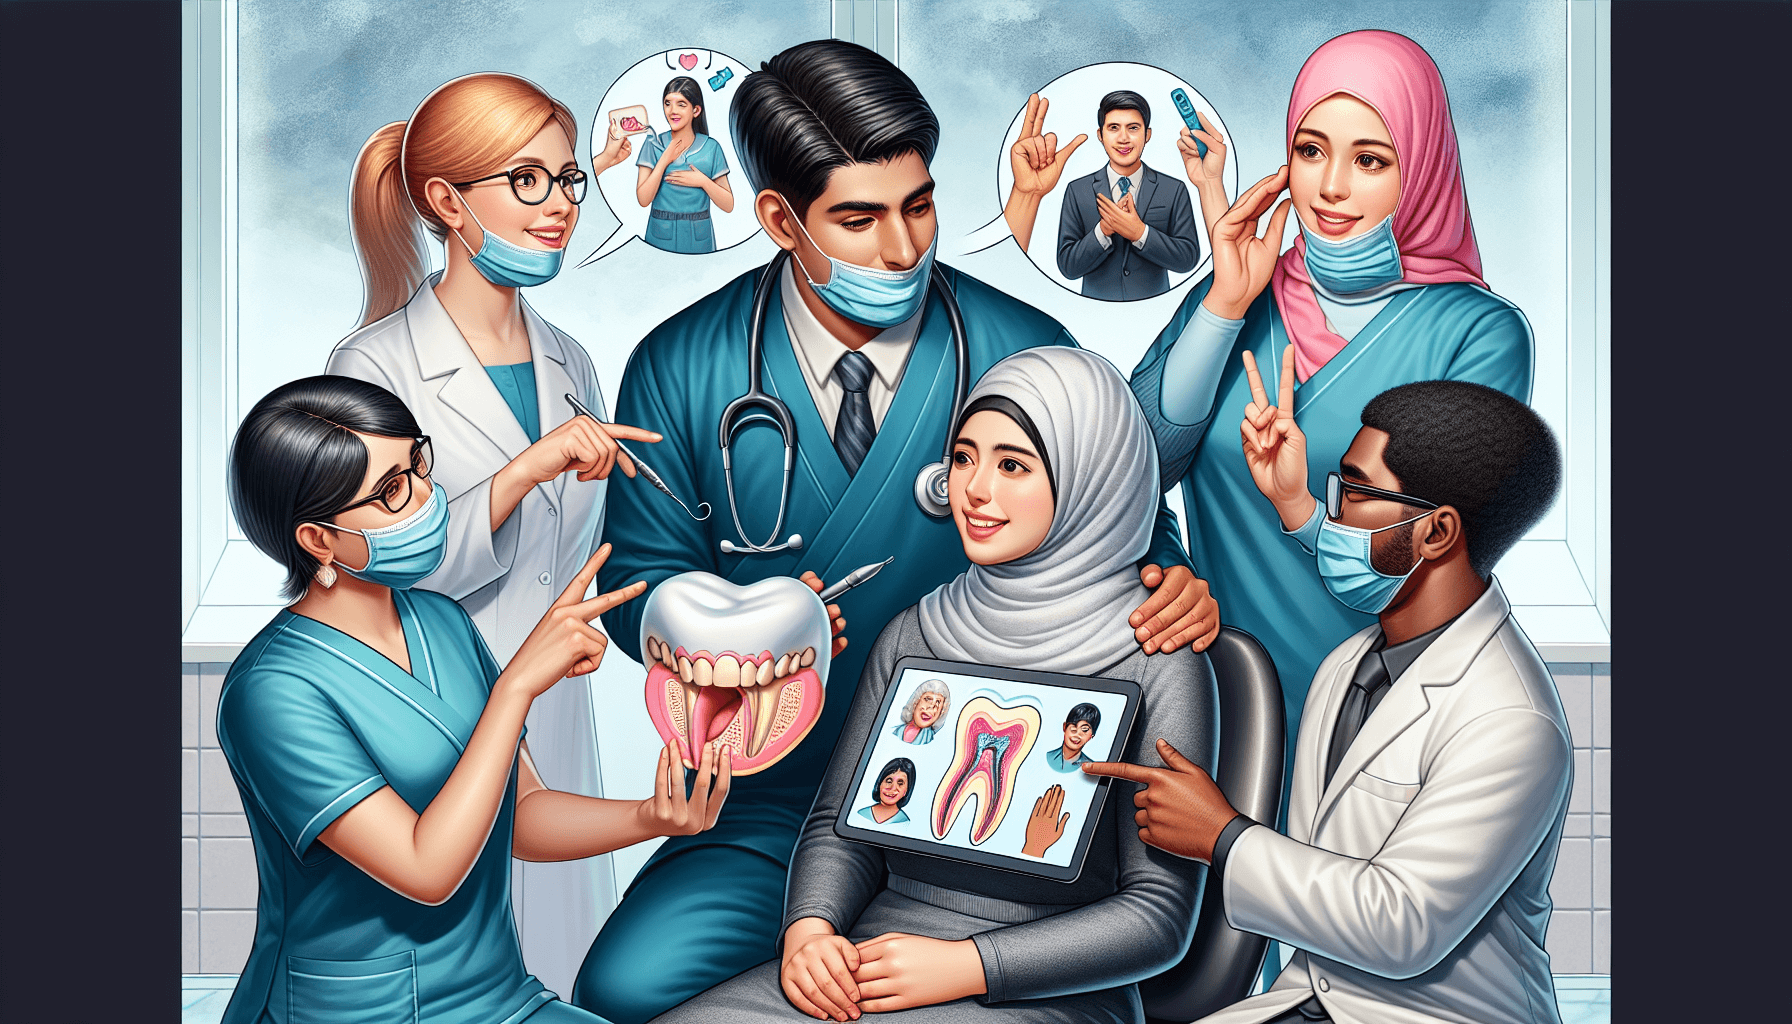 Illustration of dental professionals using visual aids to communicate with special needs patients